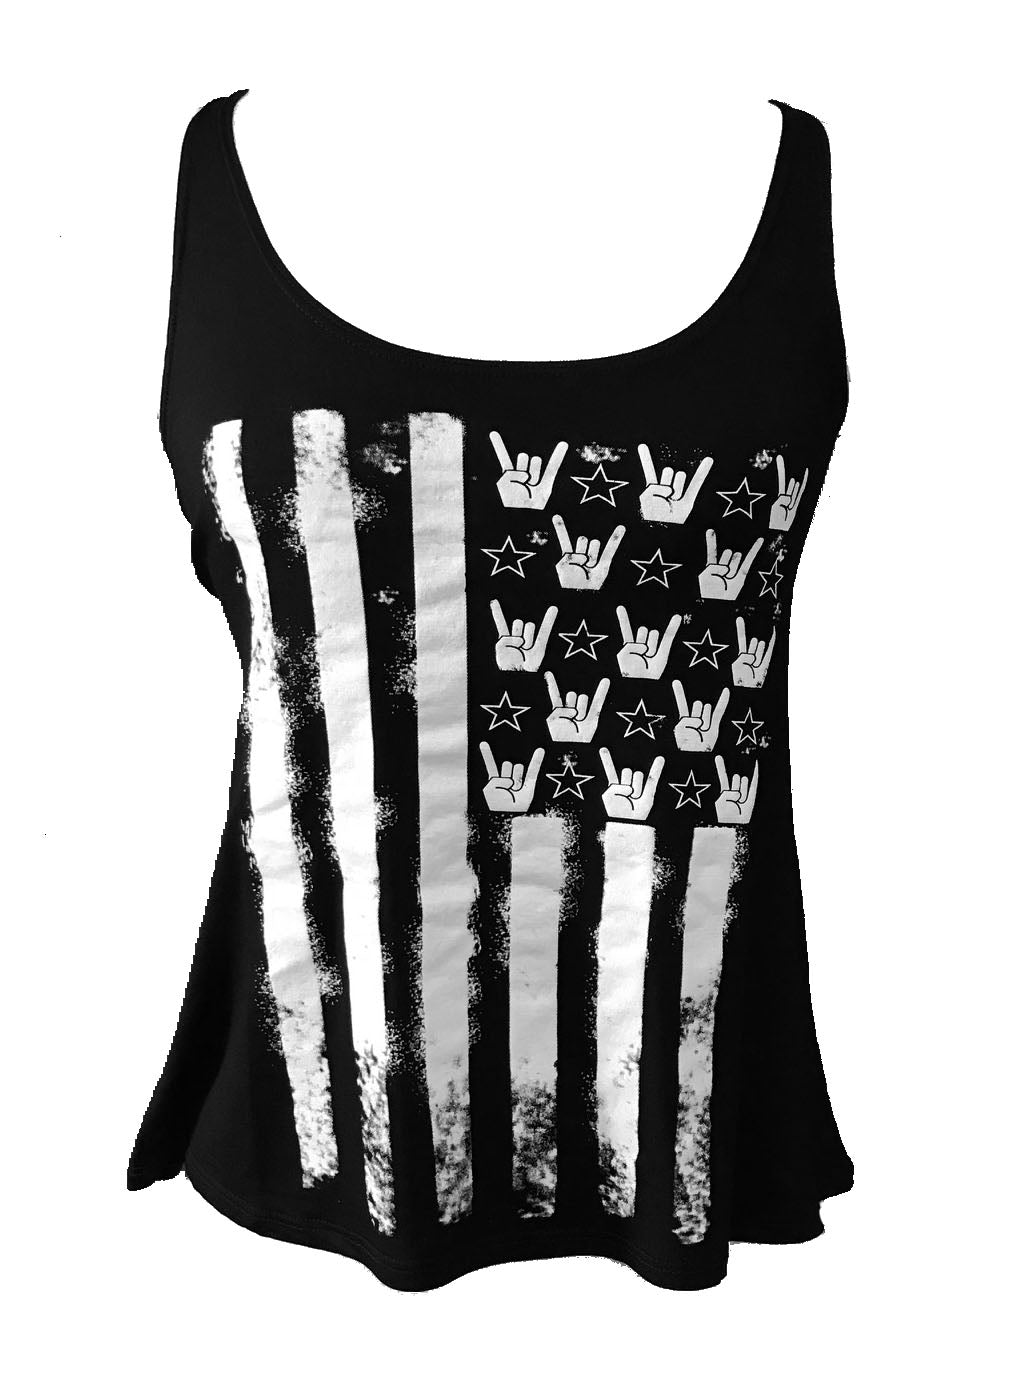 Rock and Roll Flag Tank - and, ATTITUDE, COUNTRY, countrystrong, COWGIRL, flag, GIRL, HOWDY, lips, patriotic, PLUS, rock, rocker, RODEO, roll, SIZE, strong, SUMMER, TANK, TOP, WESTERN - Shirts & Tops - Baha Ranch Western Wear